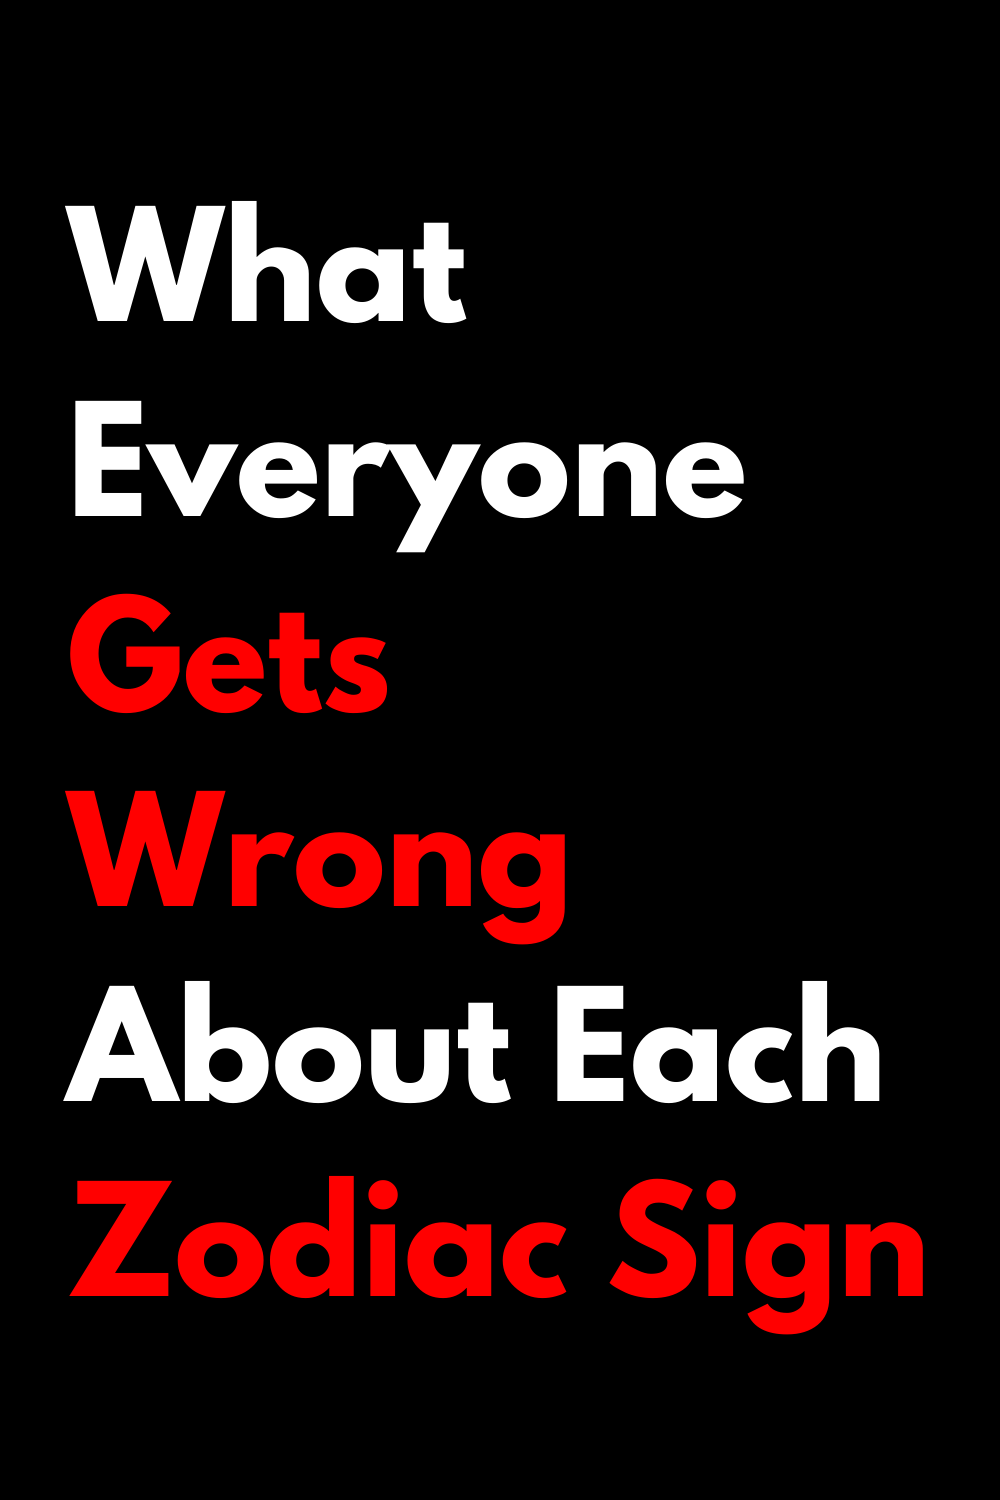 What Everyone Gets Wrong About Each Zodiac Sign